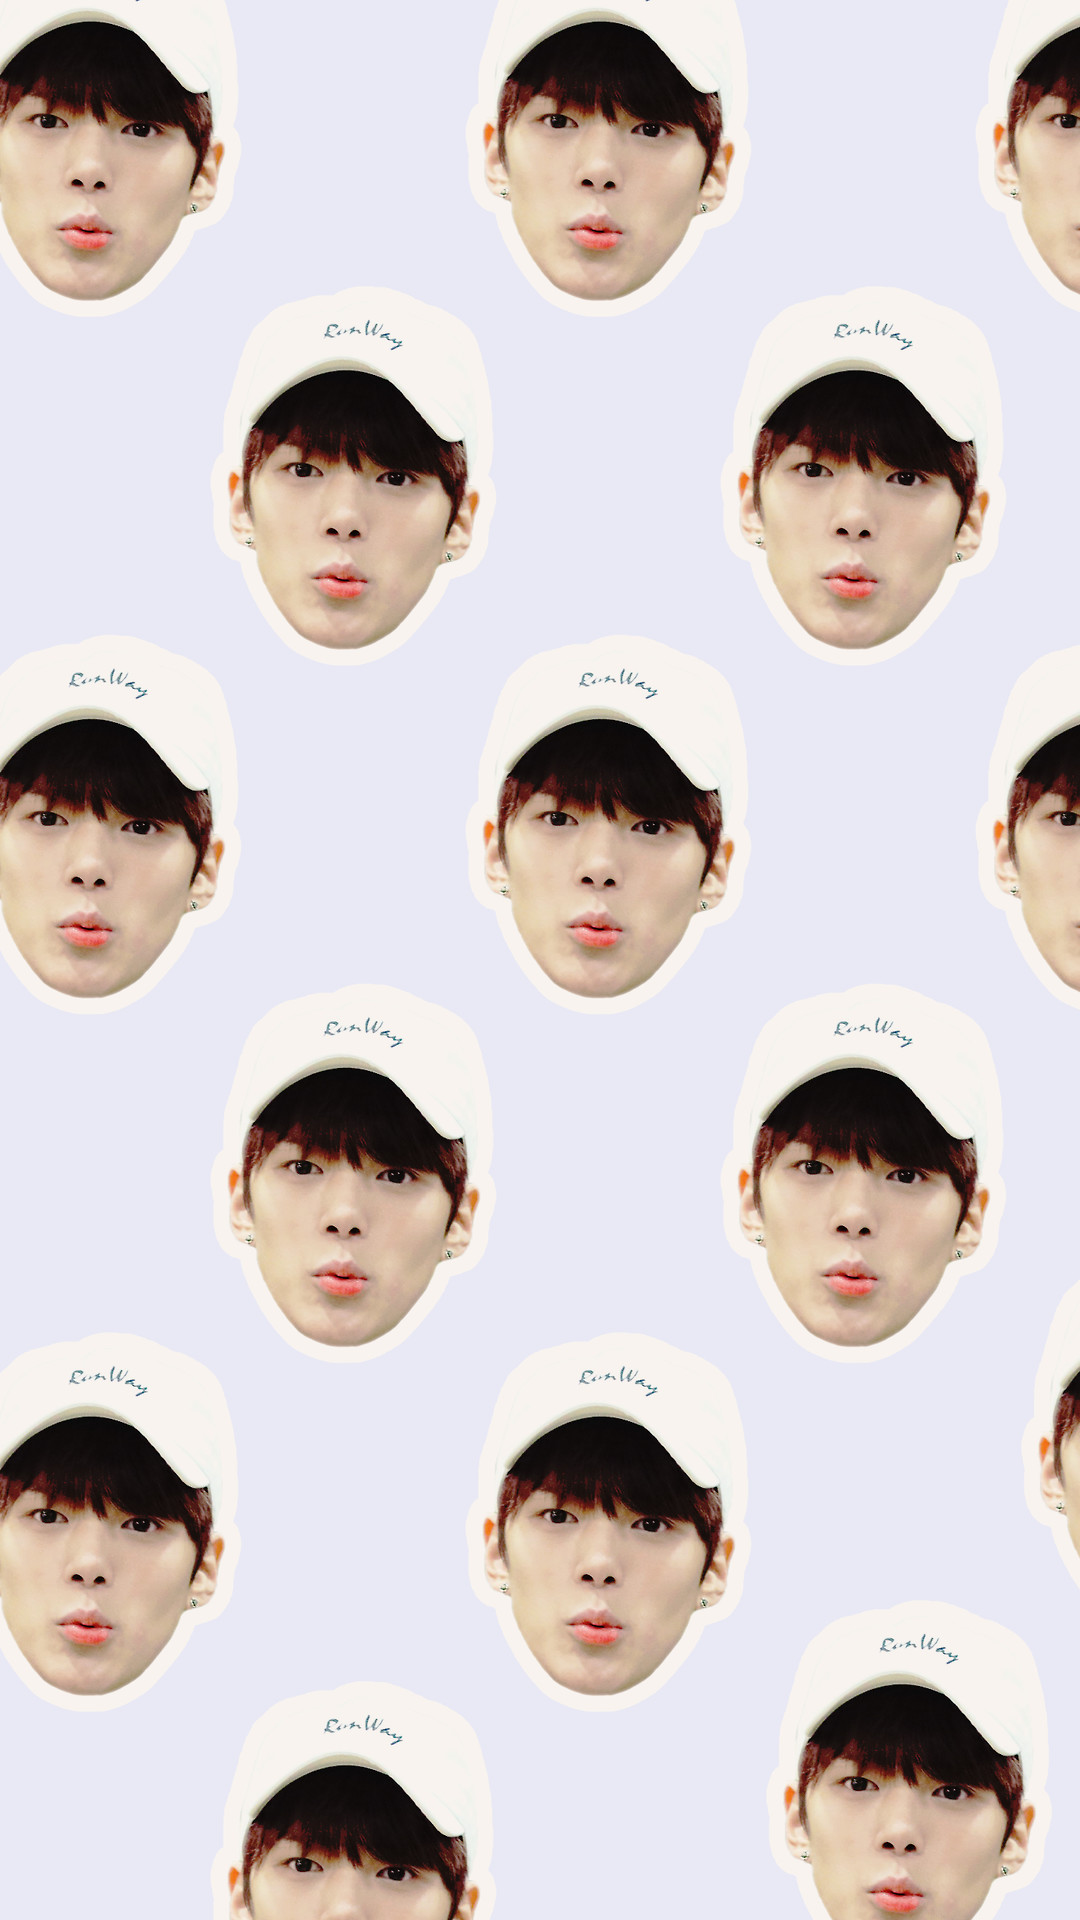 monsta x wallpaper,face,people,facial expression,head,chin